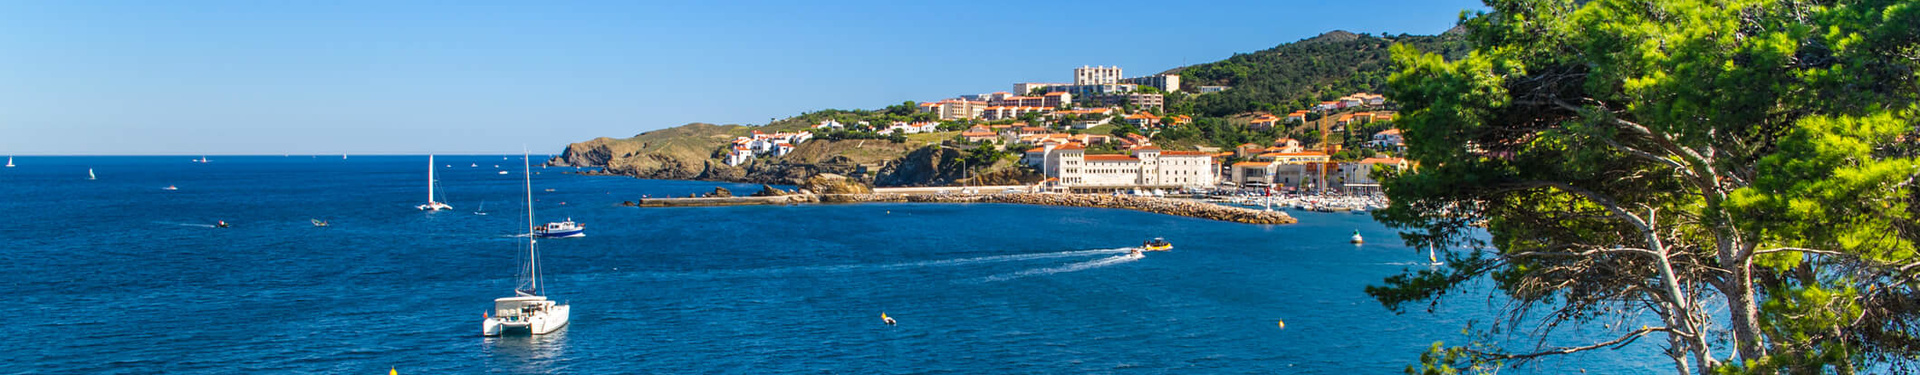 Booking form - The Mediterranean coast from Montpellier to Collioure | Nature Occitane